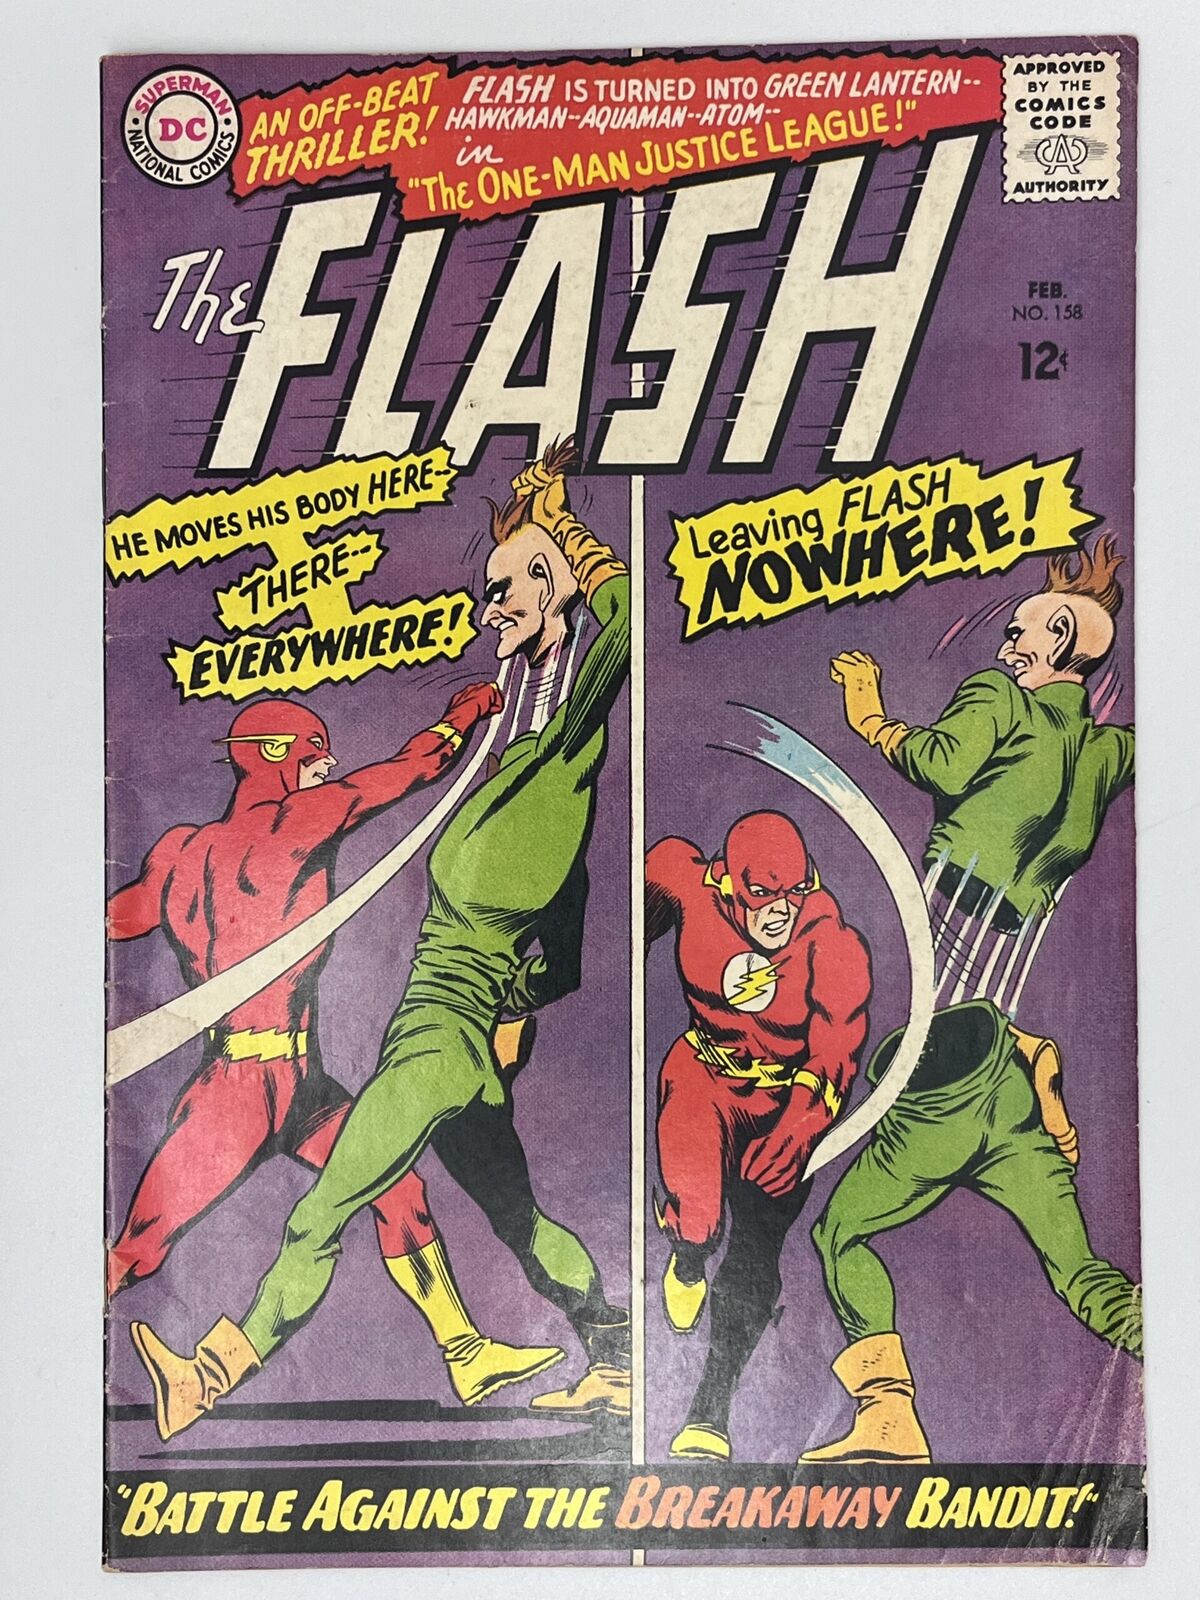 Flash #158 (1966) in 4.5 Very Good+